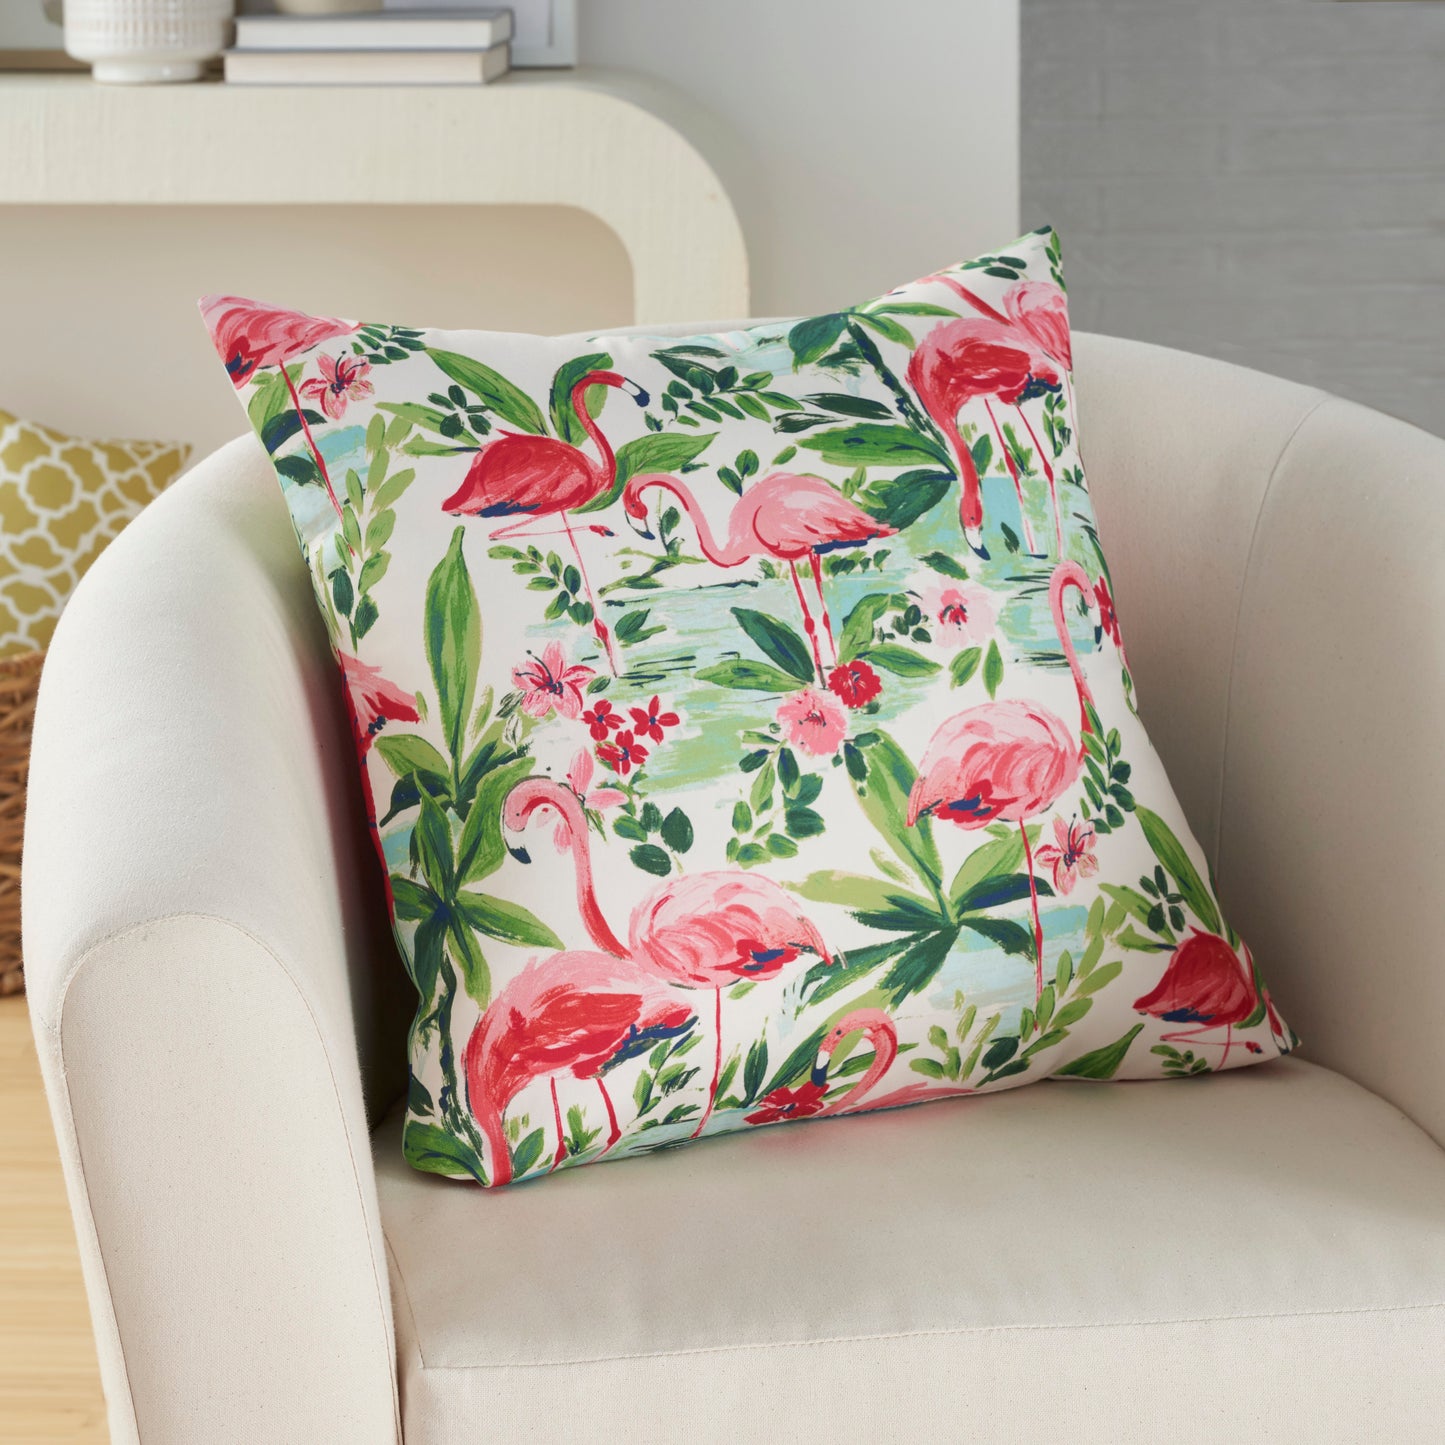 Waverly Pillows WP002 Synthetic Blend Flamingos Throw Pillow From Waverly By Nourison Rugs